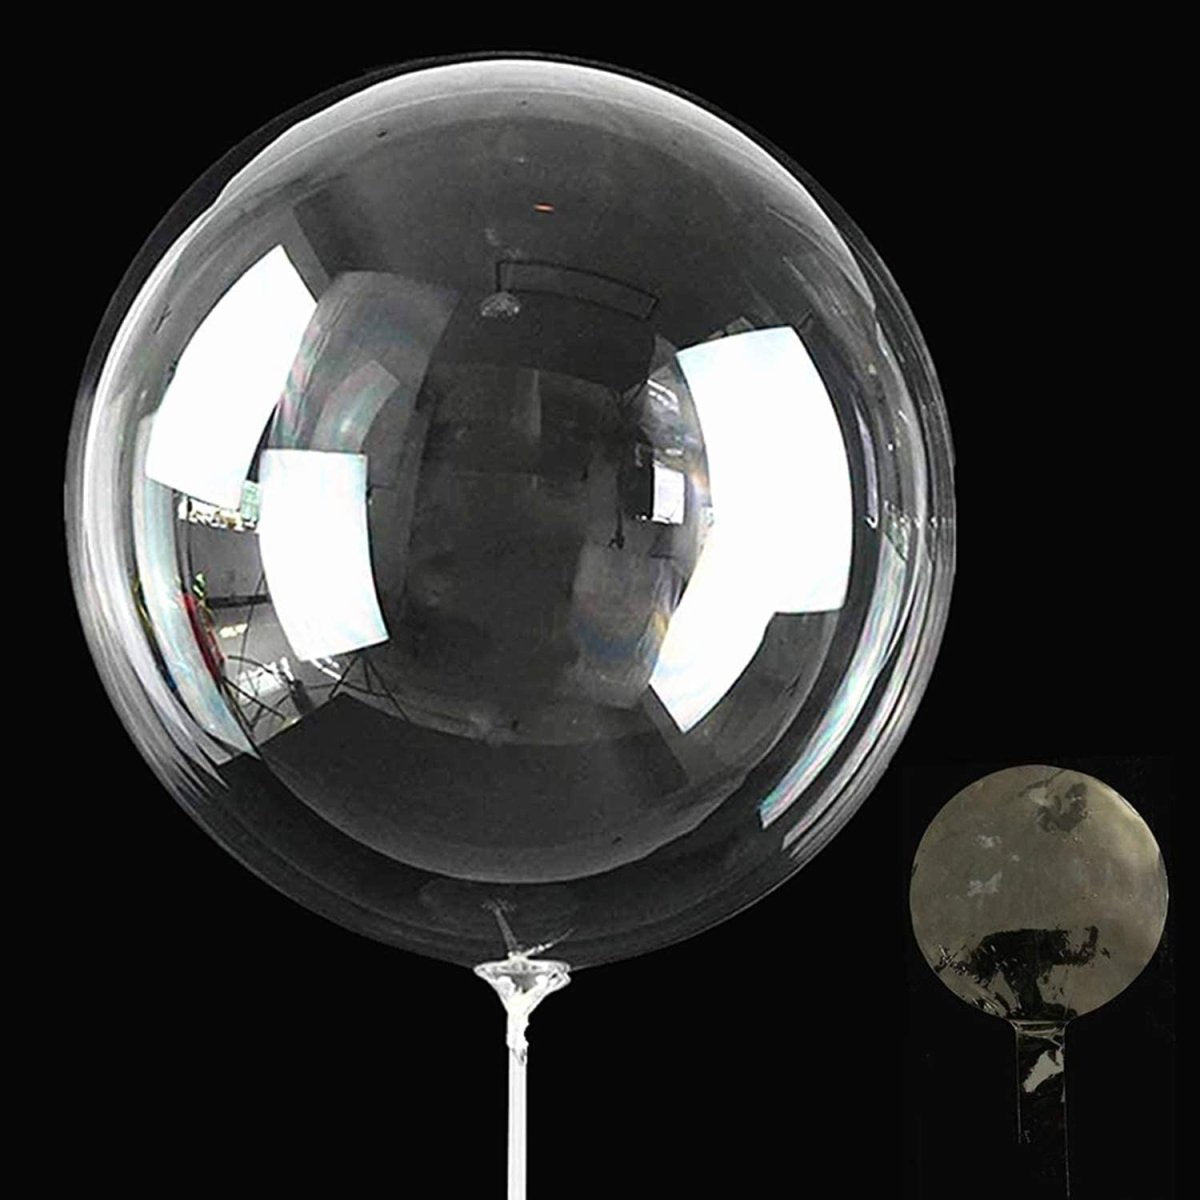 Transparent Bubble Bobo Balloons for LED Light Up Balloons, Gifts for Christmas, Wedding, Birthday Party Decorations freeshipping - CherishX Partystore